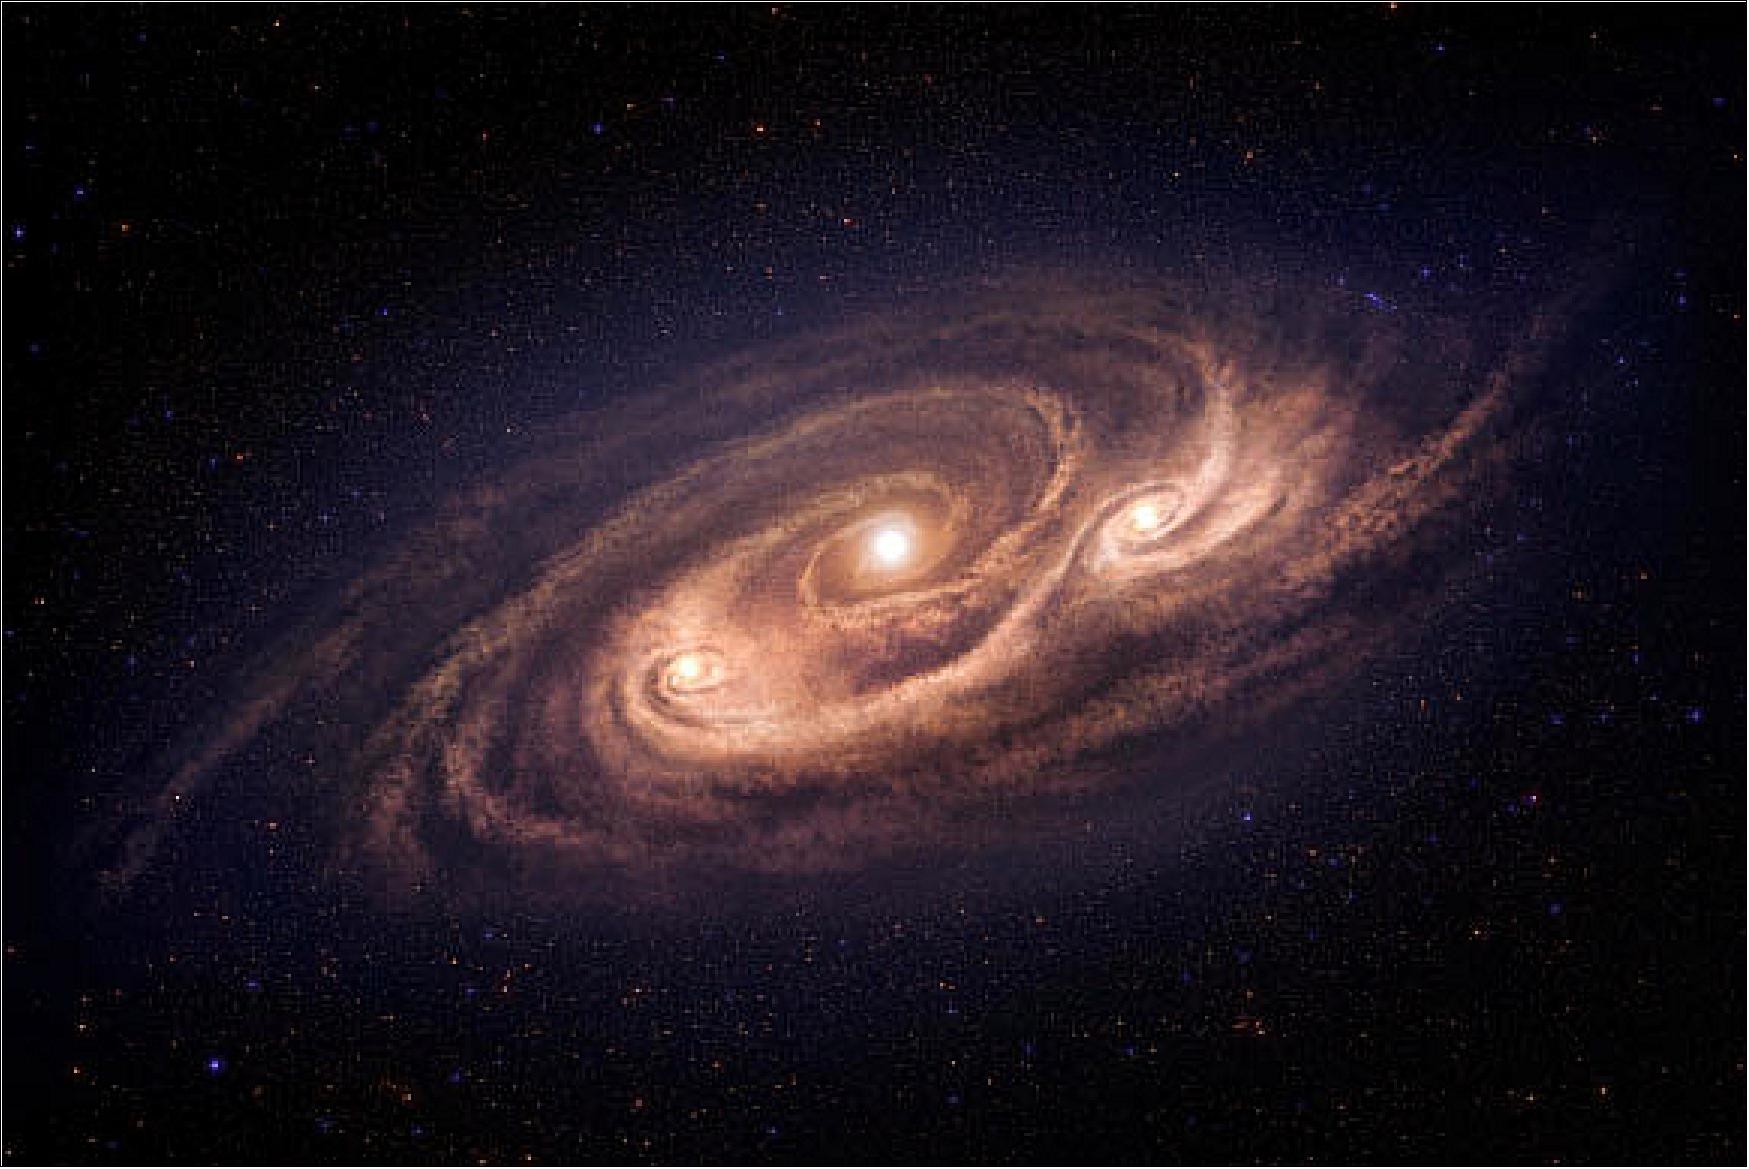 Figure 15: Artist's impression of the extreme starburst galaxy AzTEC/COSMOS-1 (image credit: National Astronomical Observatory of Japan)